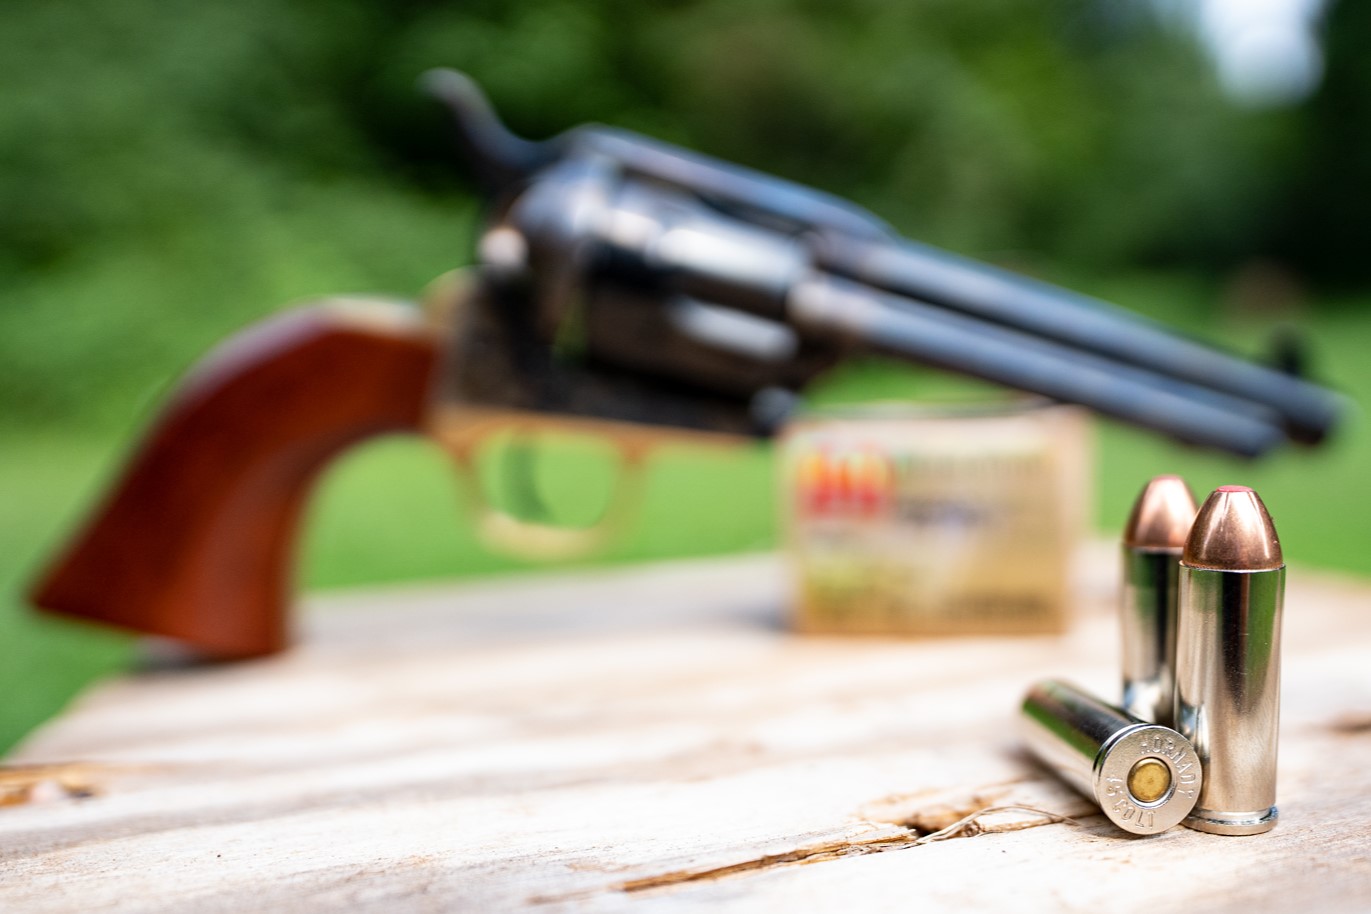 Unveiling The Ultimate Showdown: 44 Mag Vs. 45 Long Colt - Which Packs A Bigger Punch?